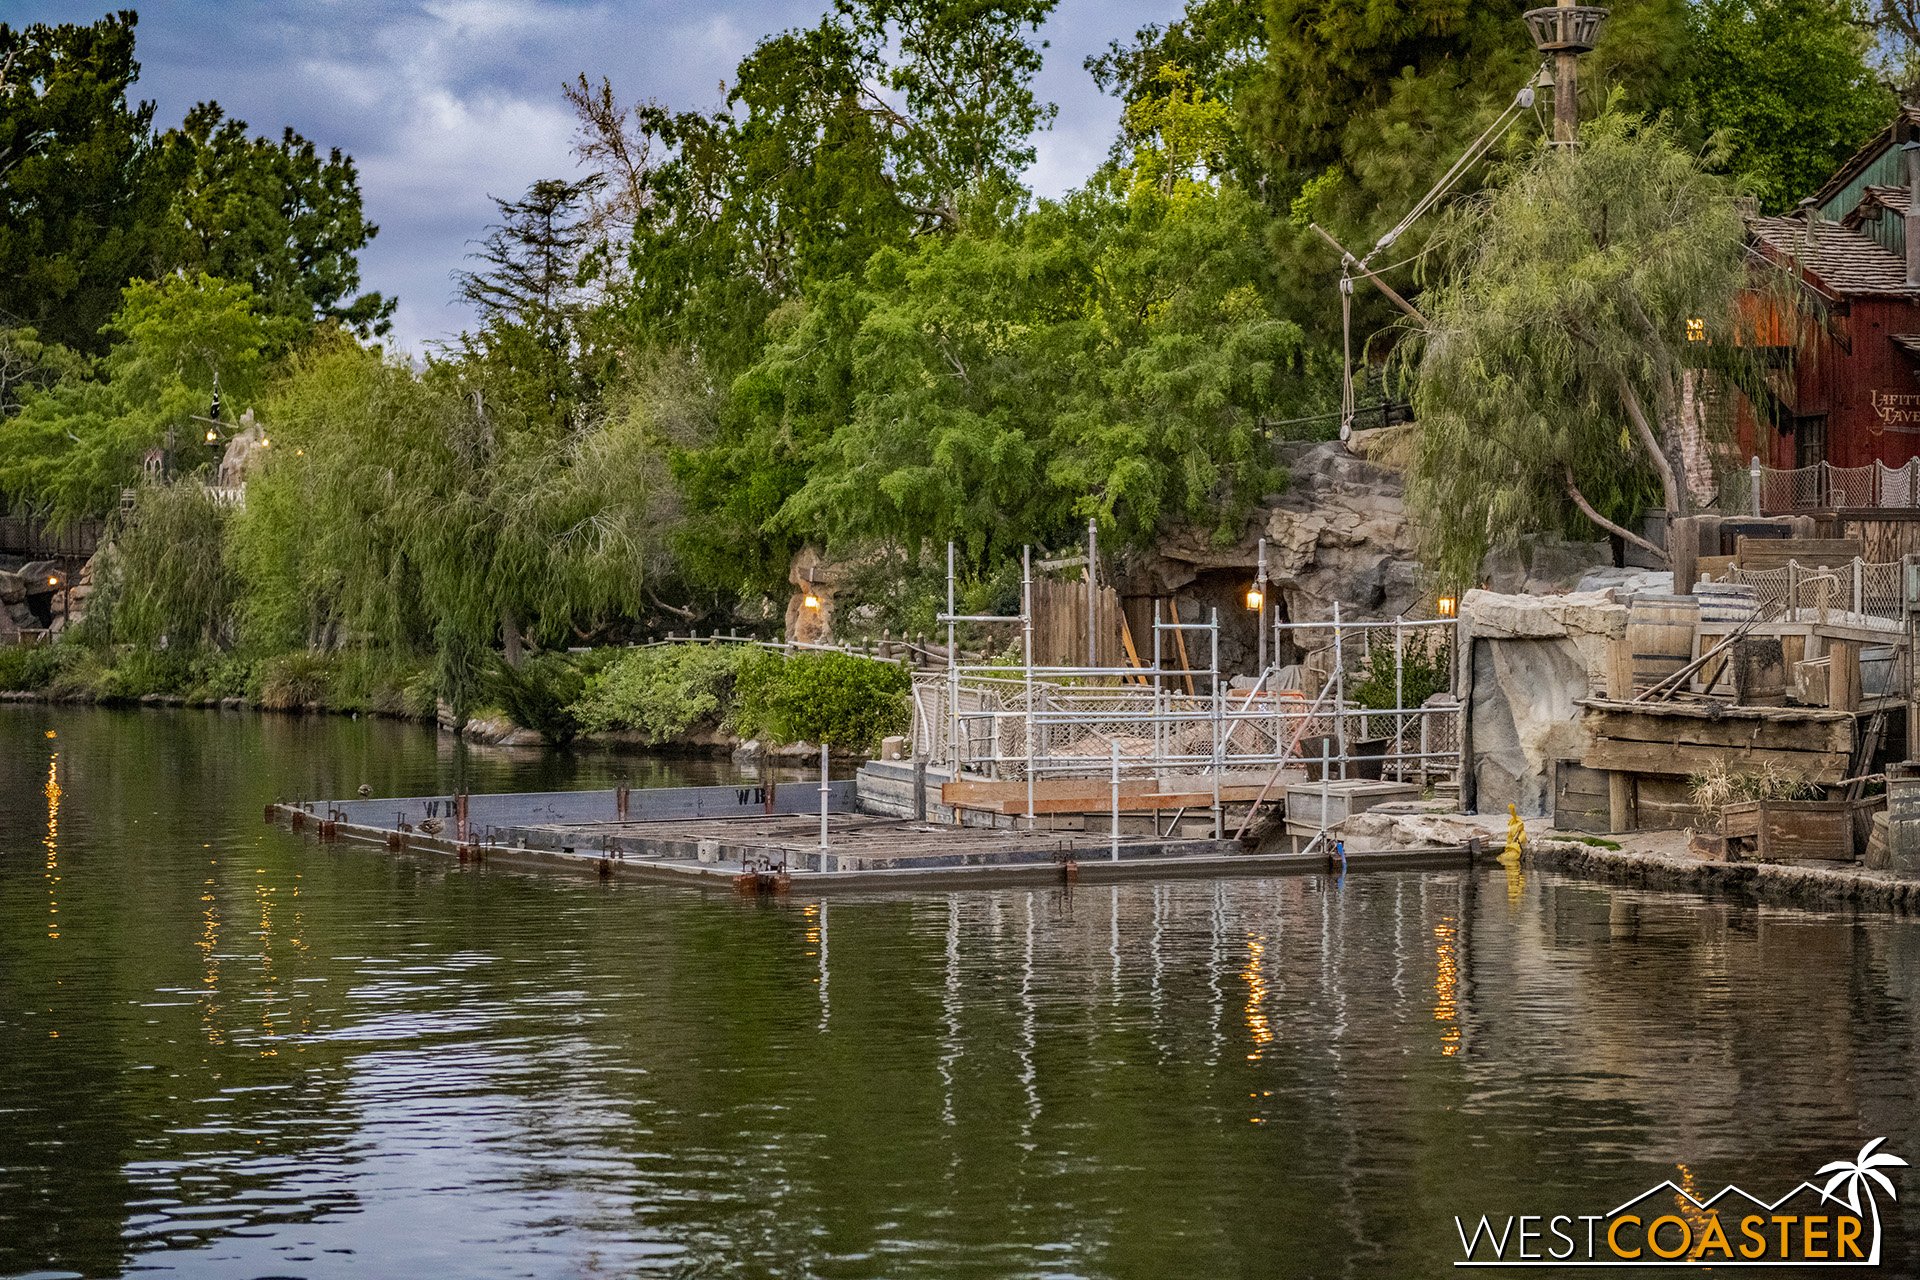  Cofferdams have been re-established to continue work on the projection infrastructure for FANTASMIC! 